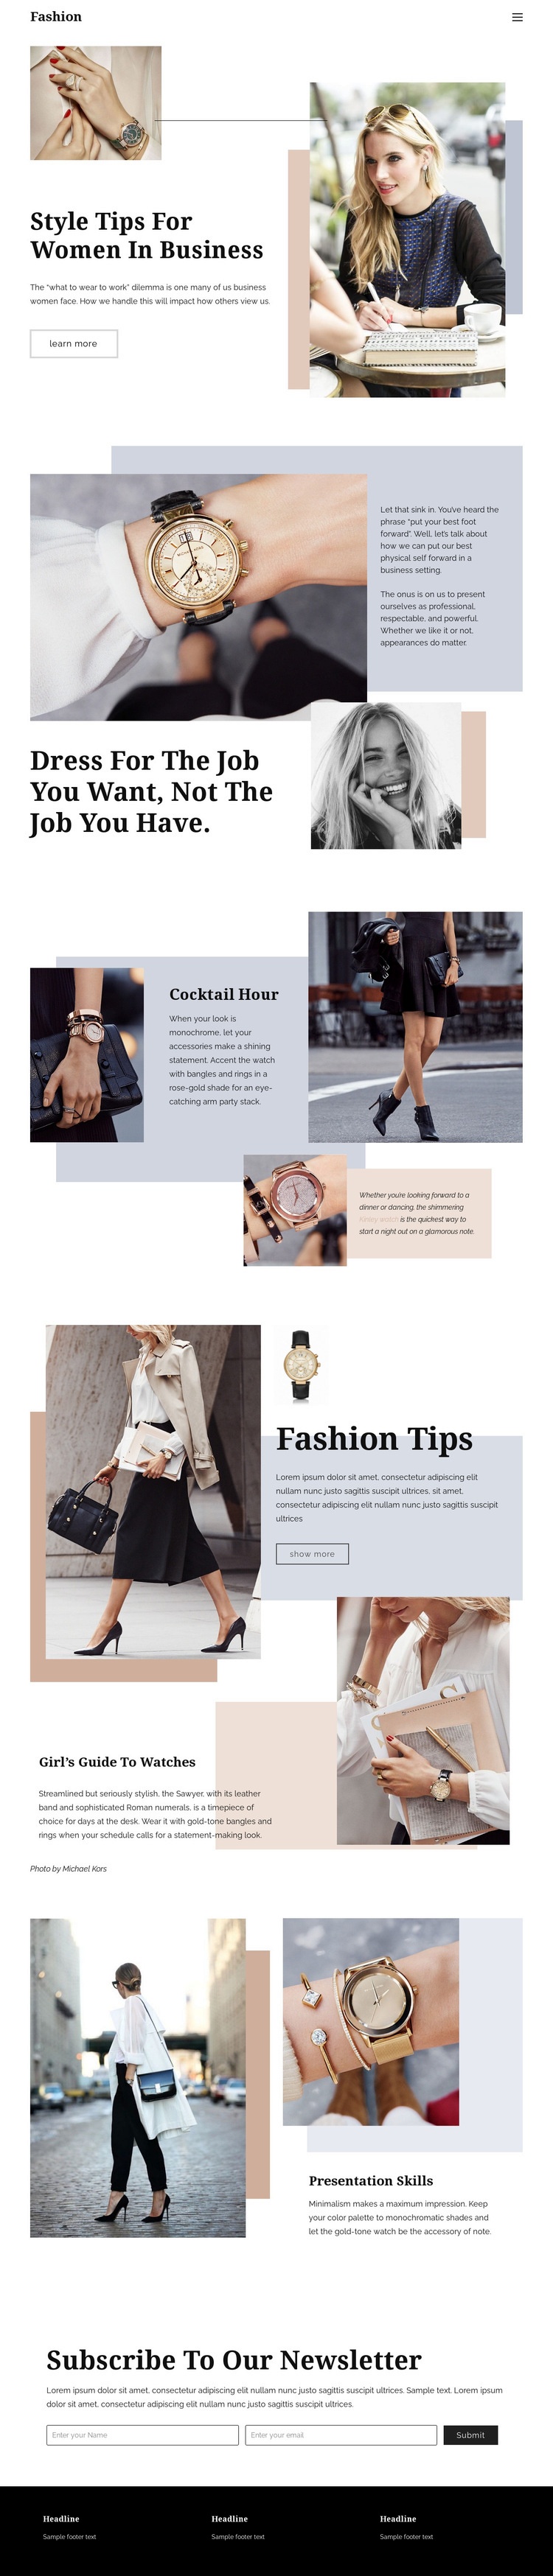 Fashion tips Html Code Example